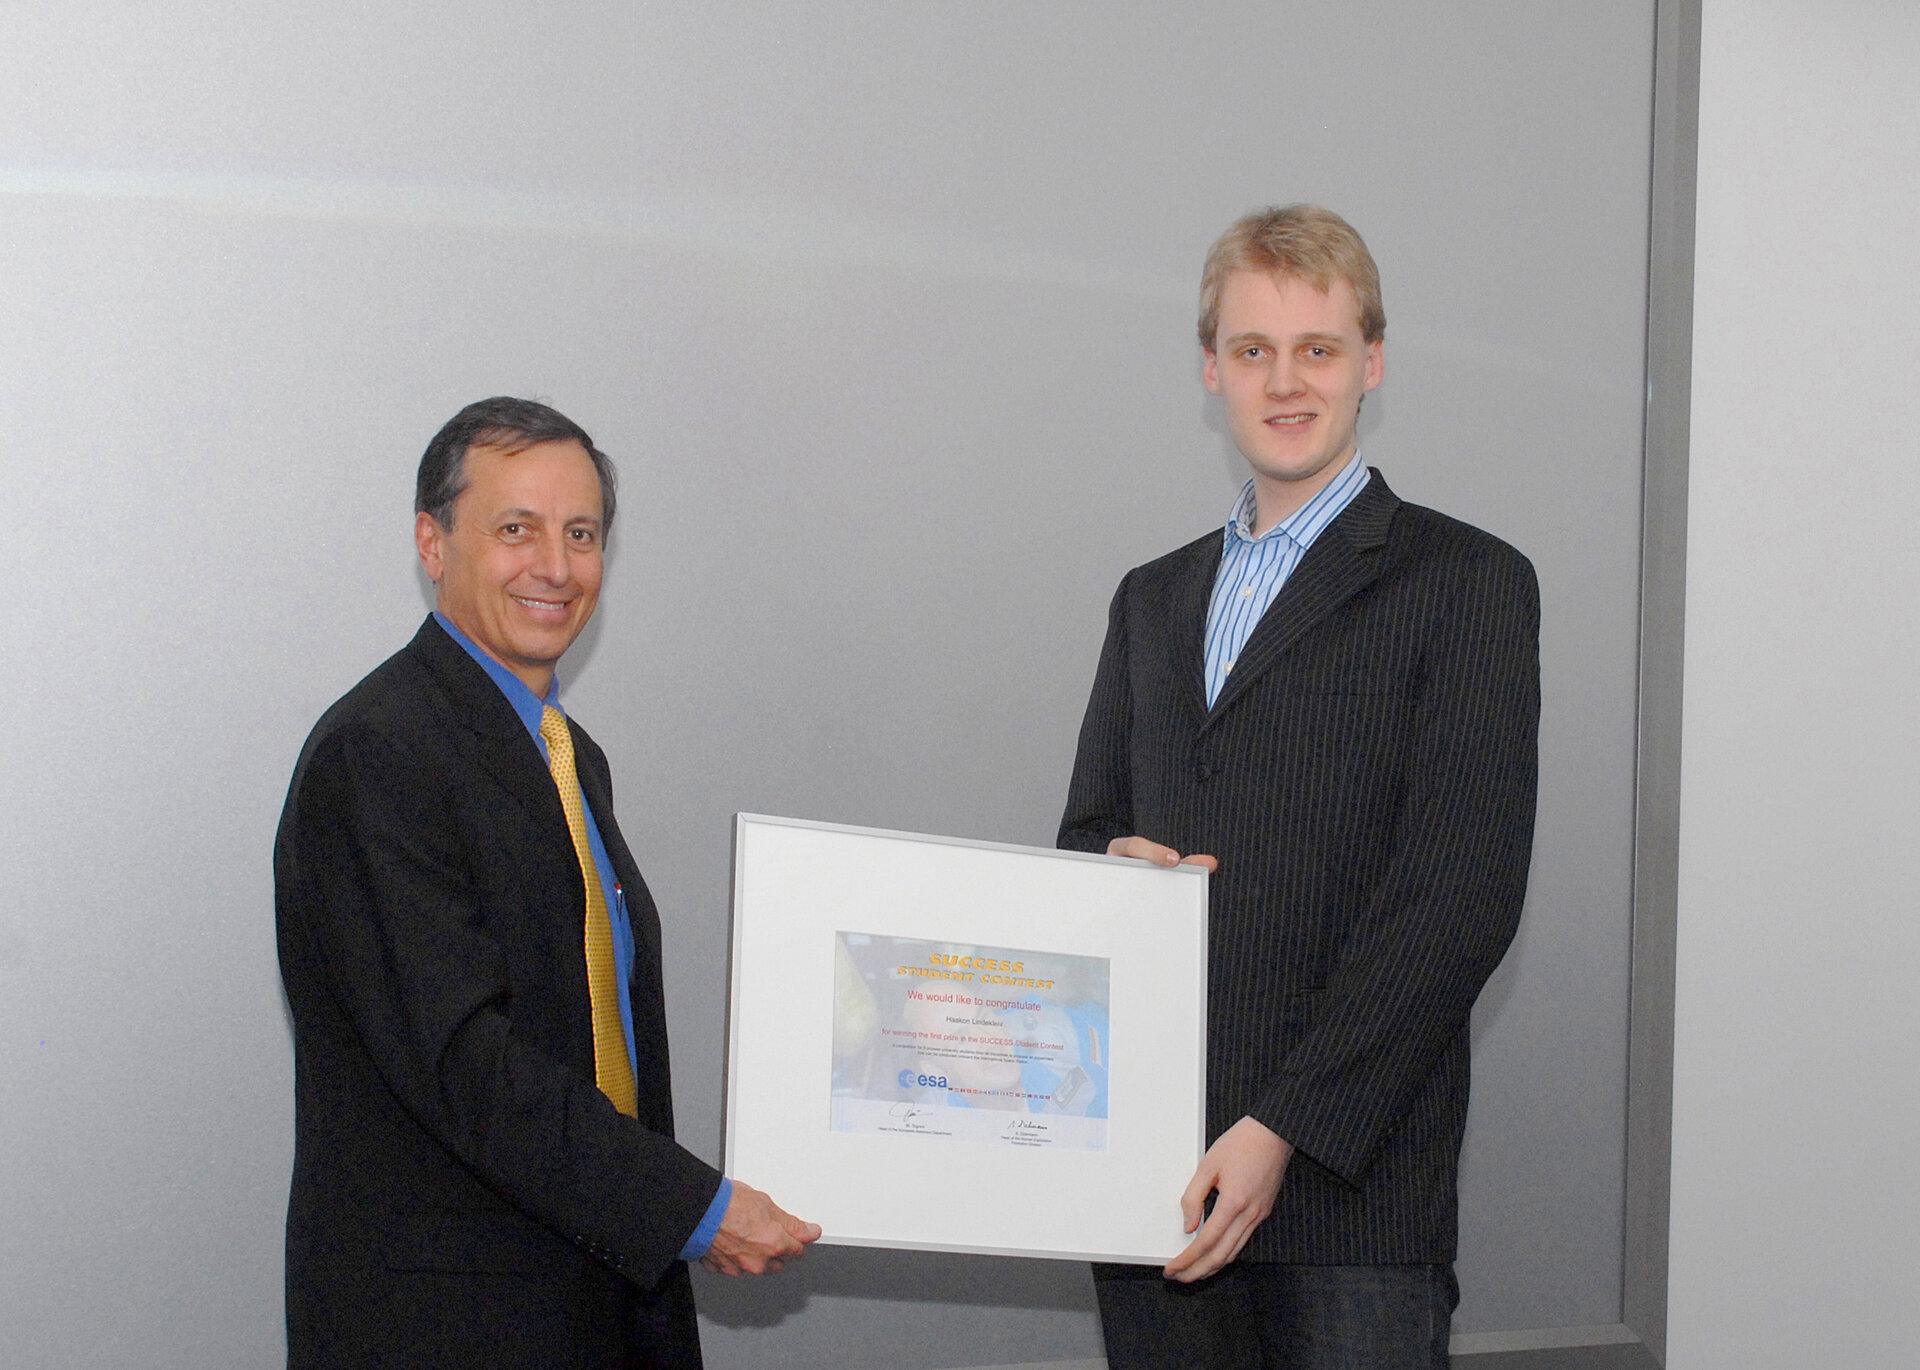 A previous winner of the SUCCESS Contest: Haakon Lindekleiv from Norway